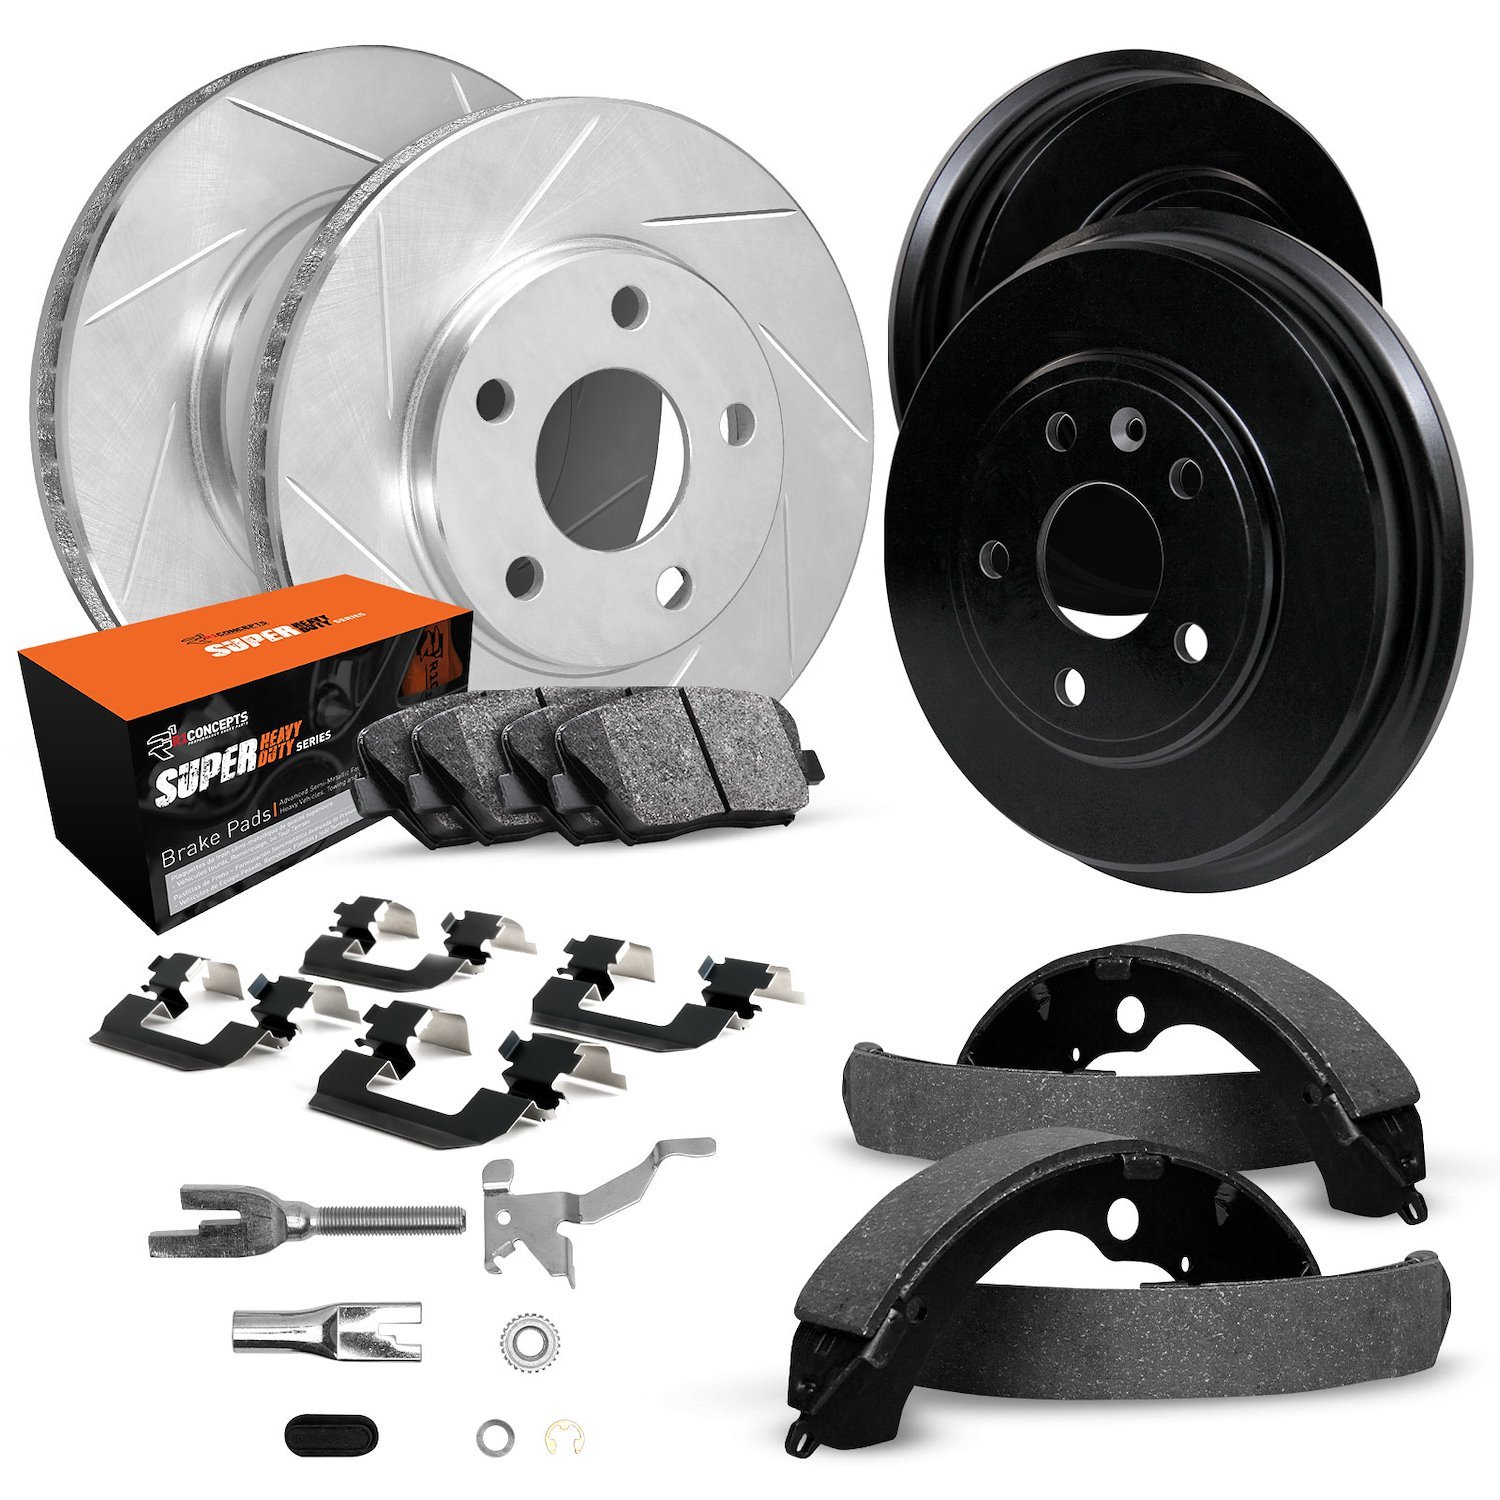 E-Line Slotted Silver Rotor & Drum Set w/Super-Duty Pads, Shoes/Hardware/Adjusters, 1997-2004 Ford/Lincoln/Mercury/Mazda